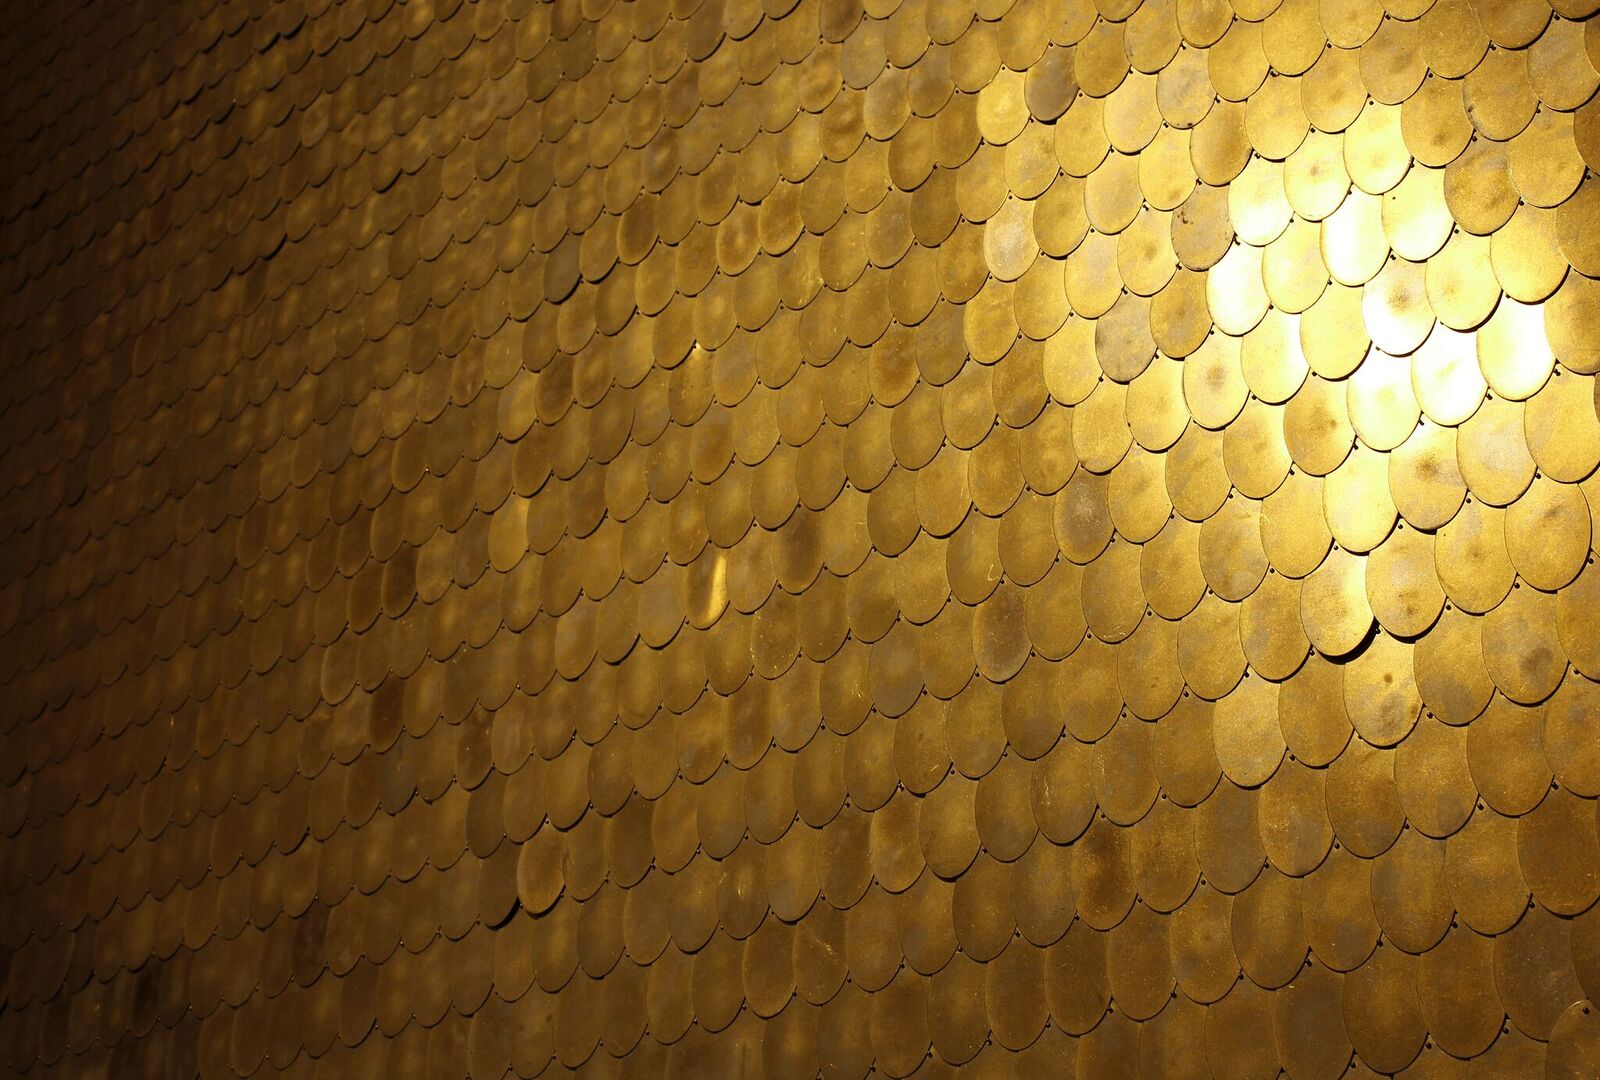 The result? Oval-shaped, hand-hammered brass tiles that can be arranged and overlaid in patterns for walls in offices, restaurants or homes.